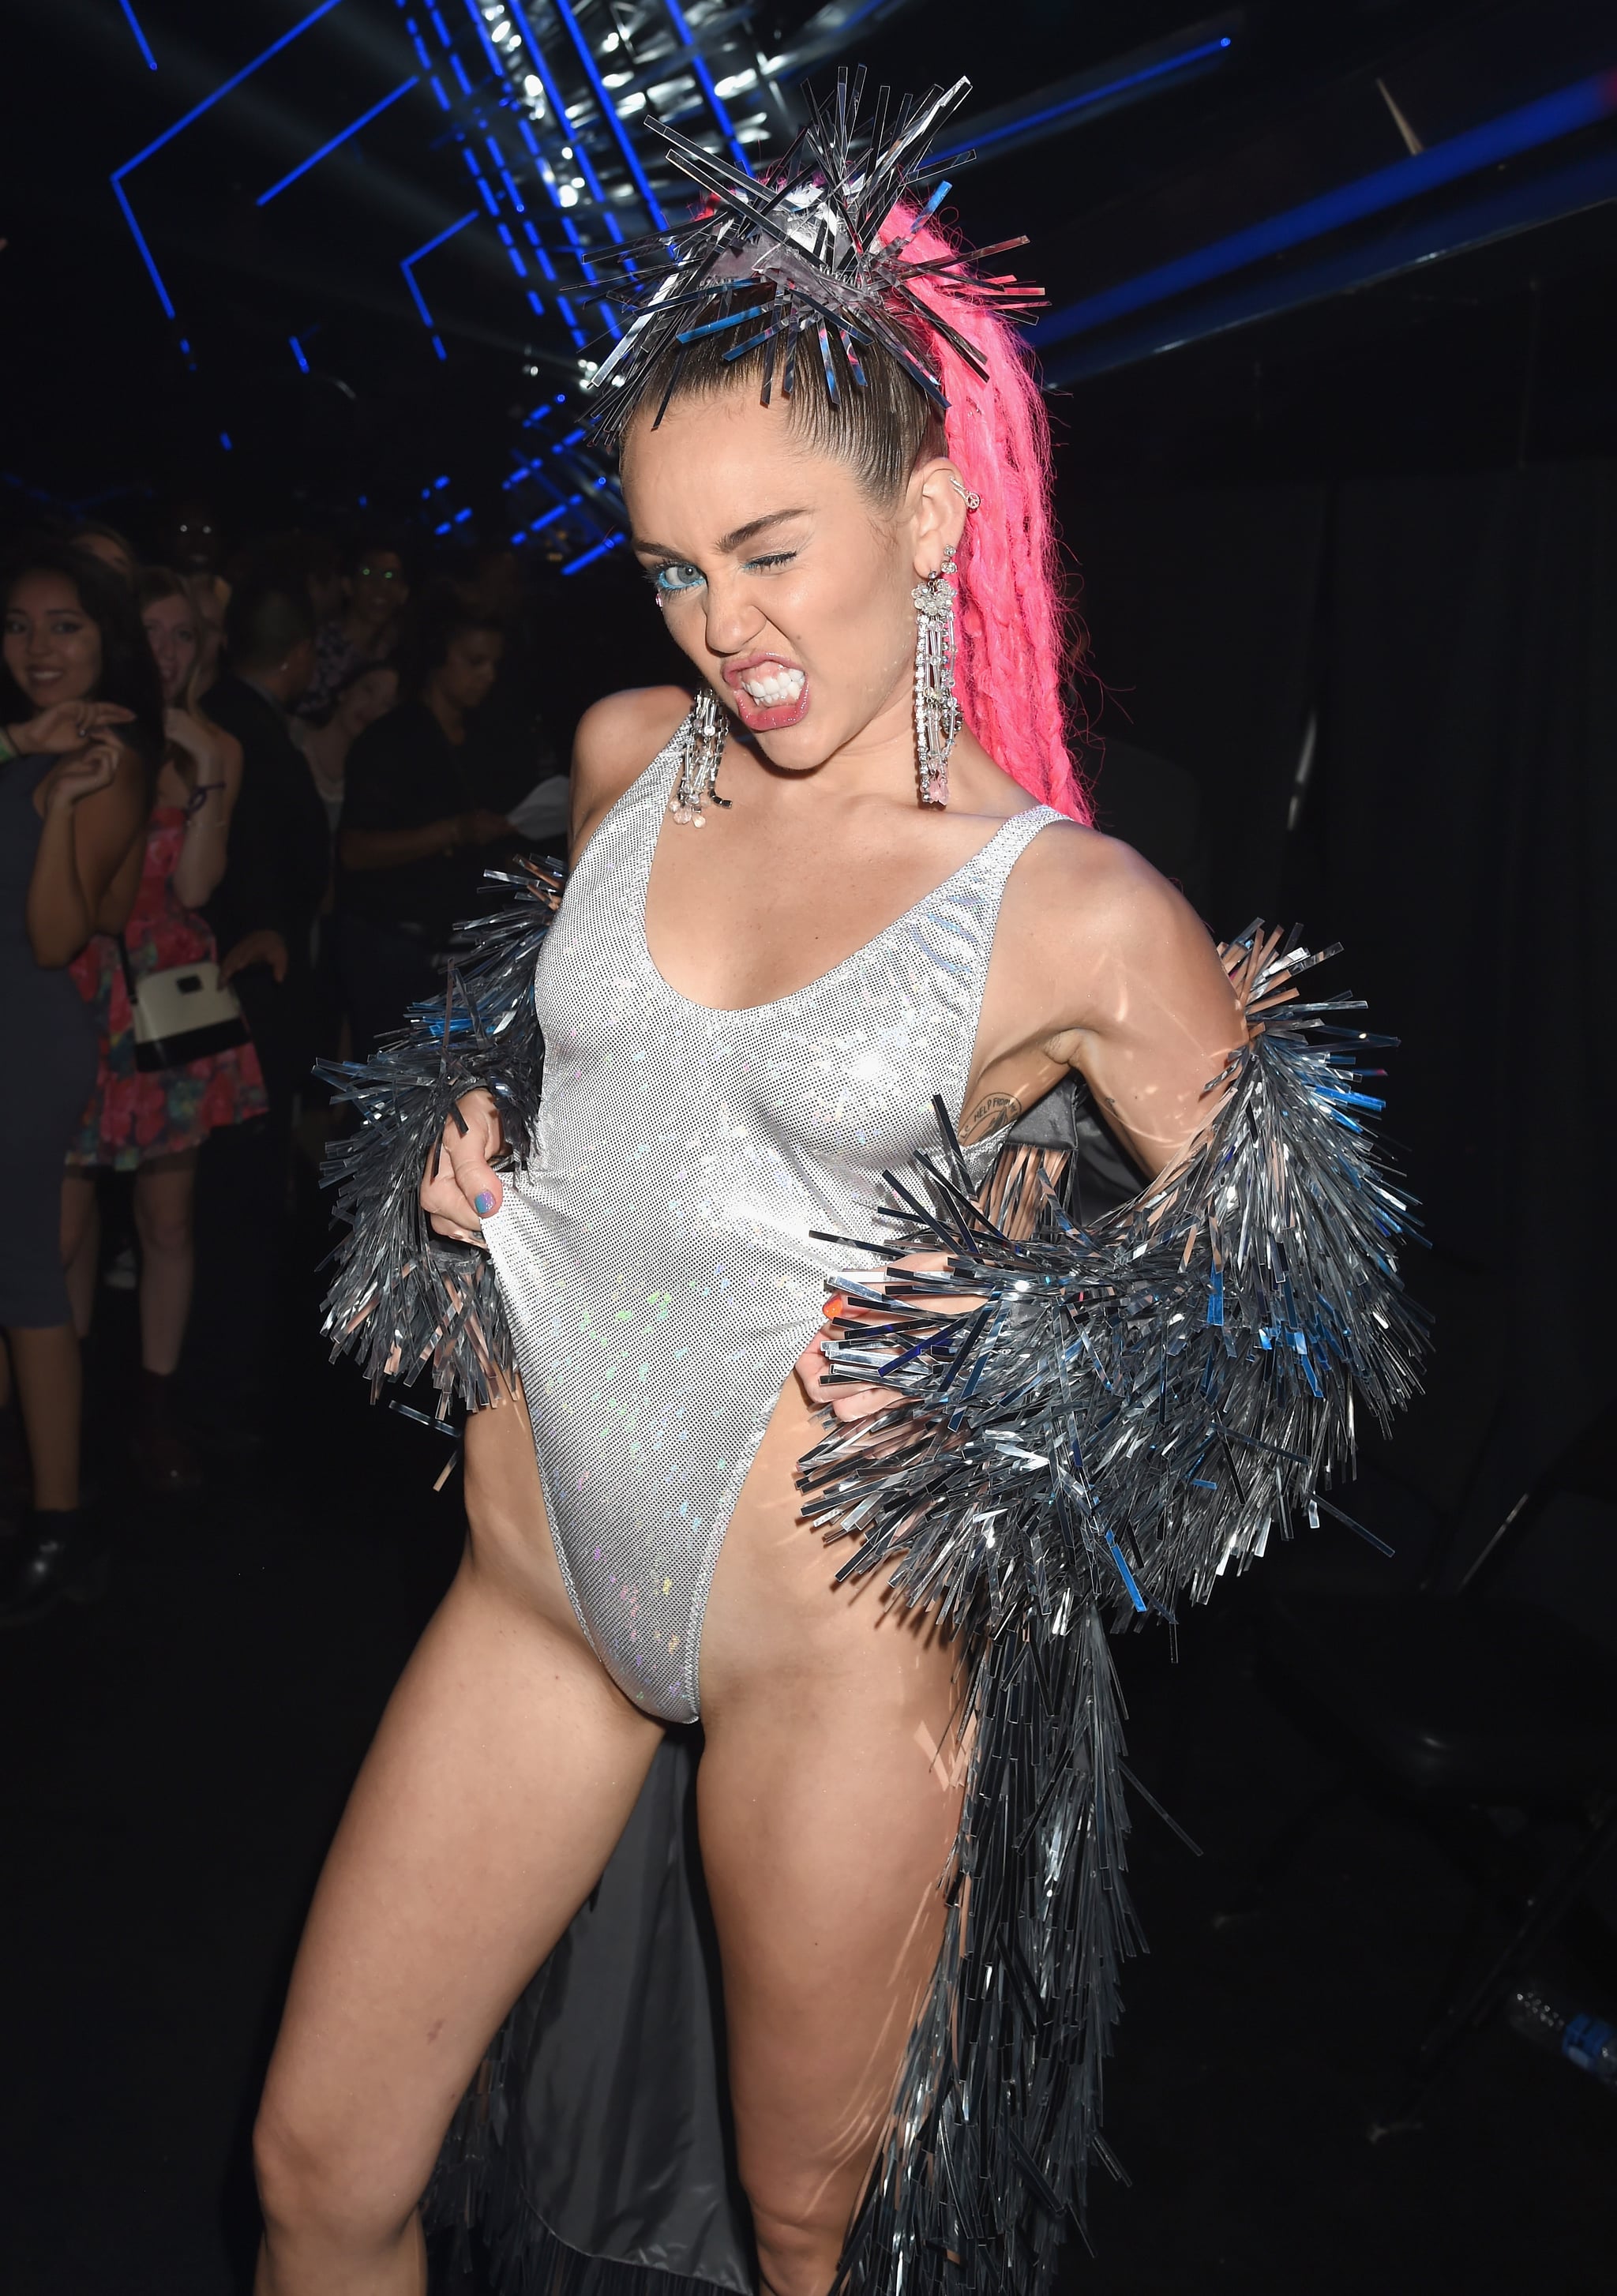 Upskirt Video Miley Cyrus - Miley Cyrus at the MTV VMAs 2015 Pictures | POPSUGAR Celebrity